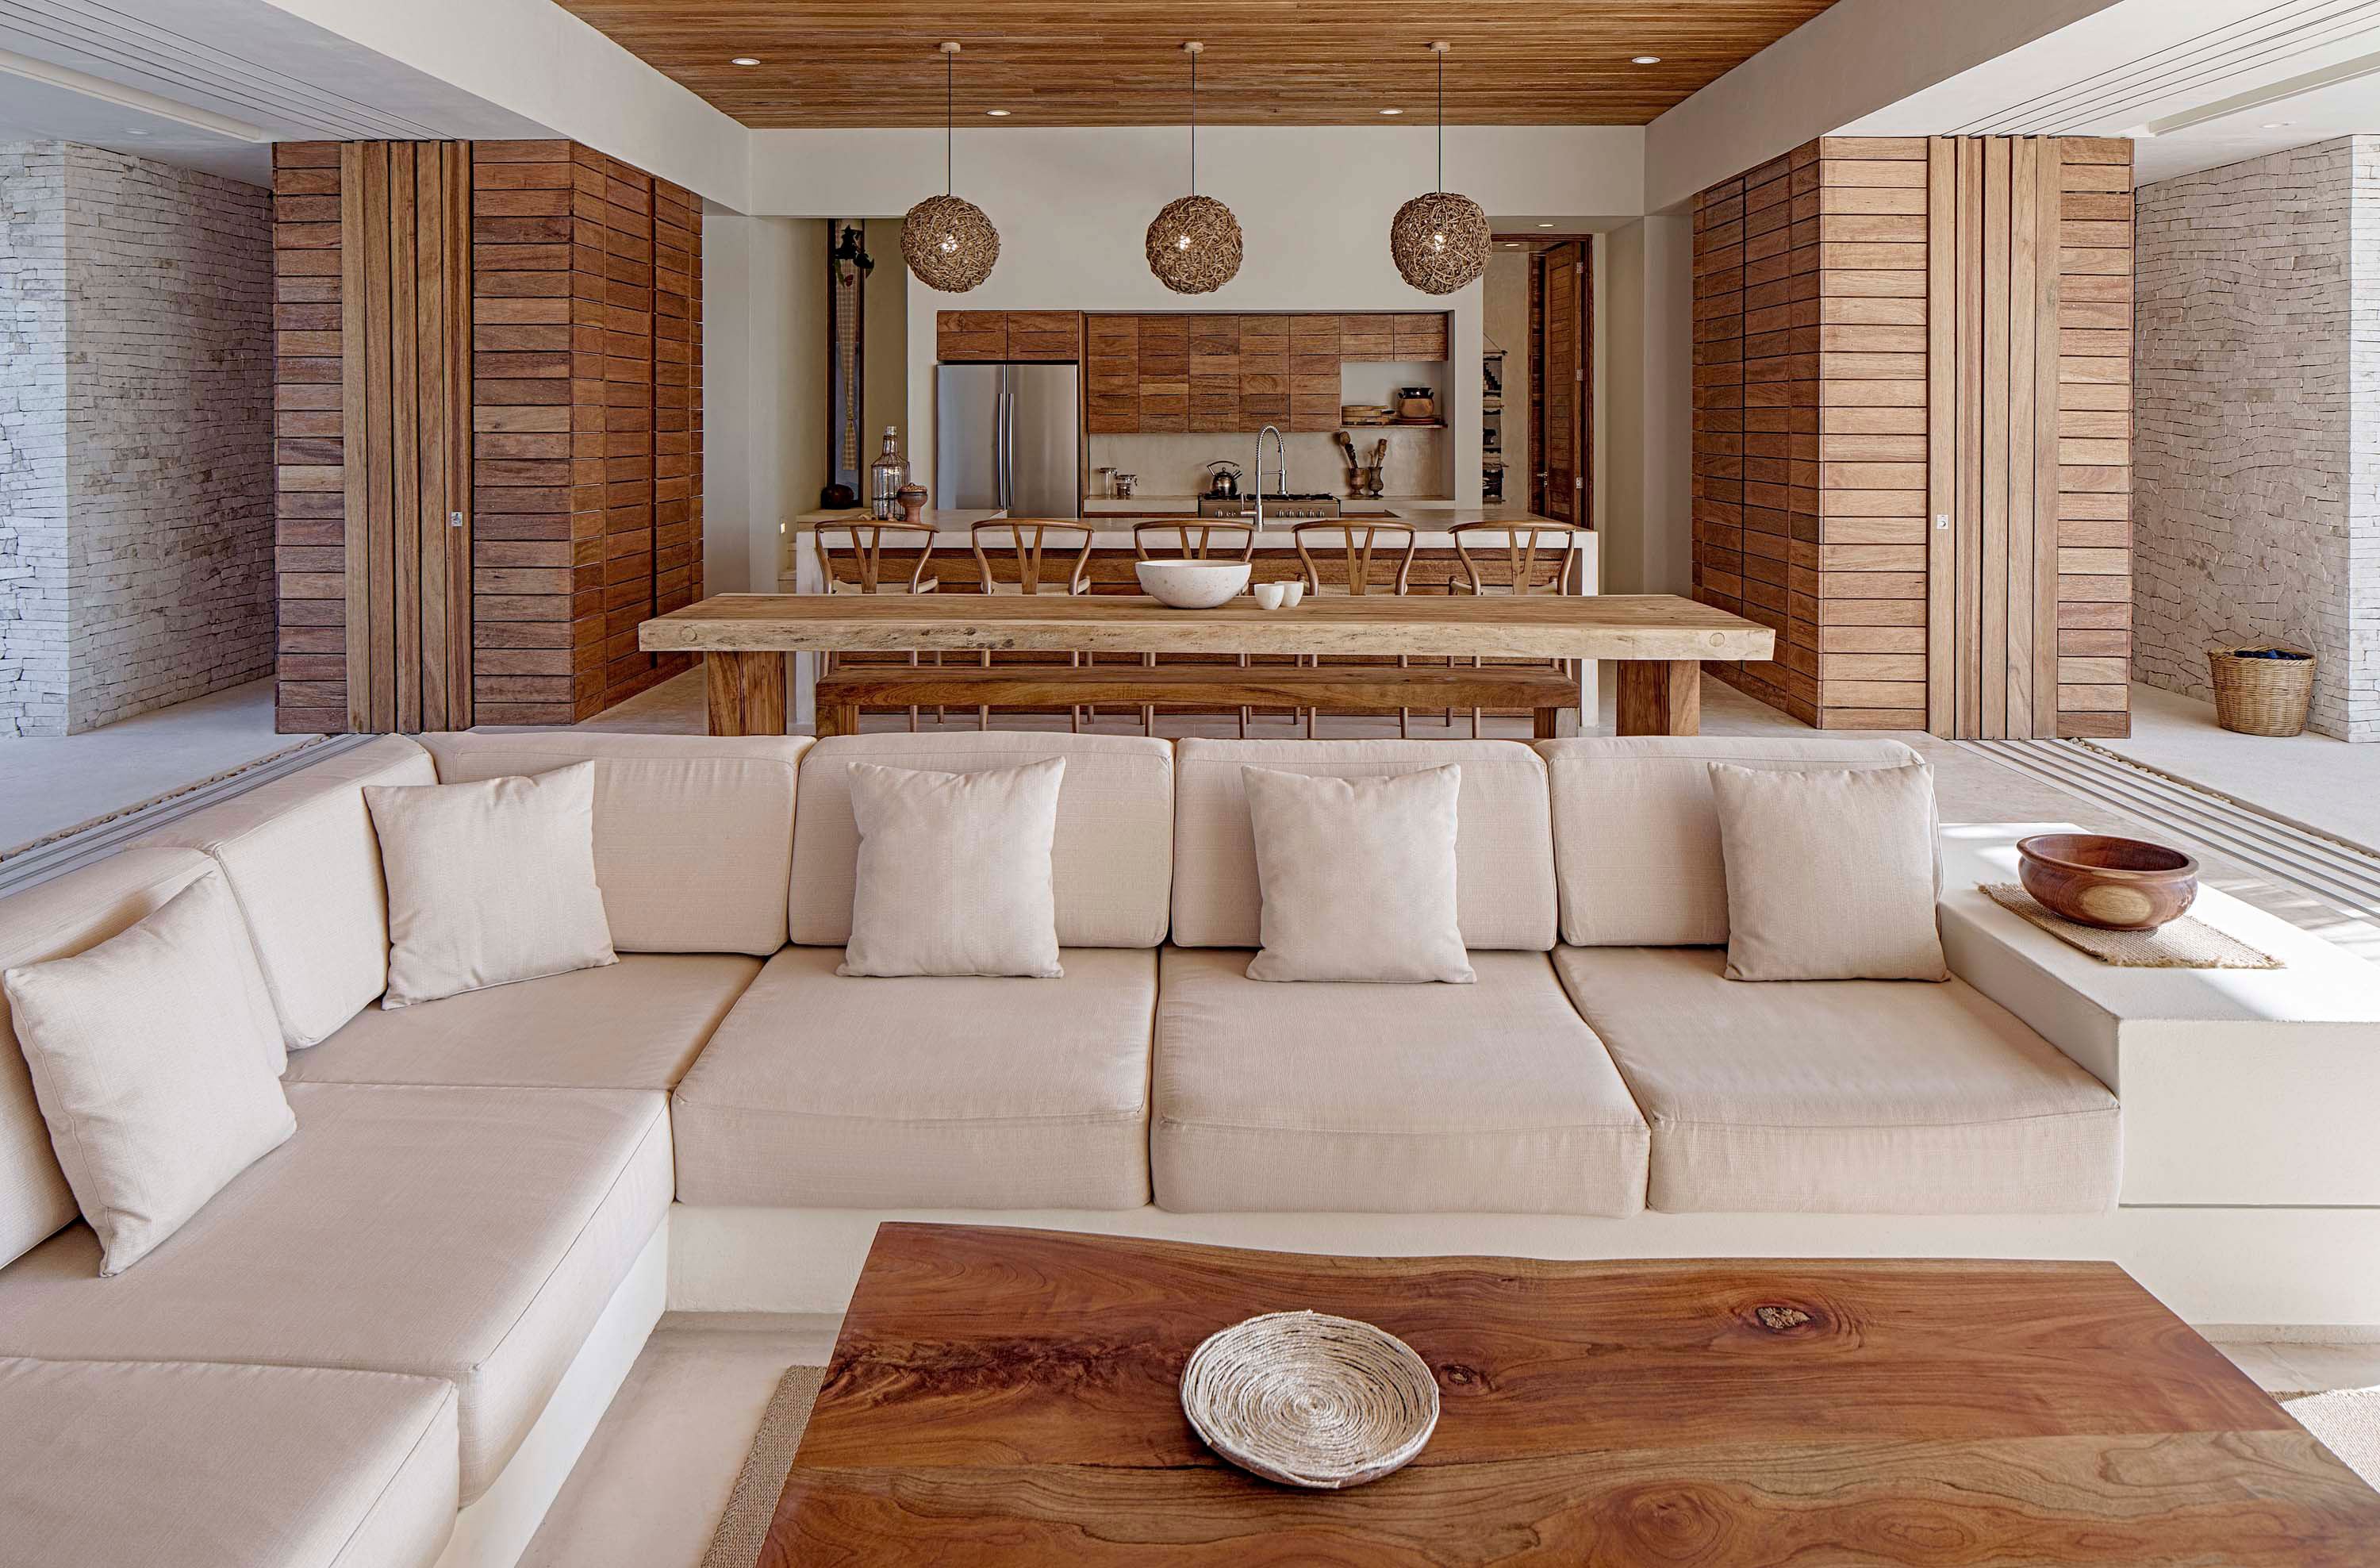 Interior photo of Casa Xixim by Specht Novak Architects. Shot by Taggart Sorensen, featuring living area, wooden accents, and kitchen in the background.